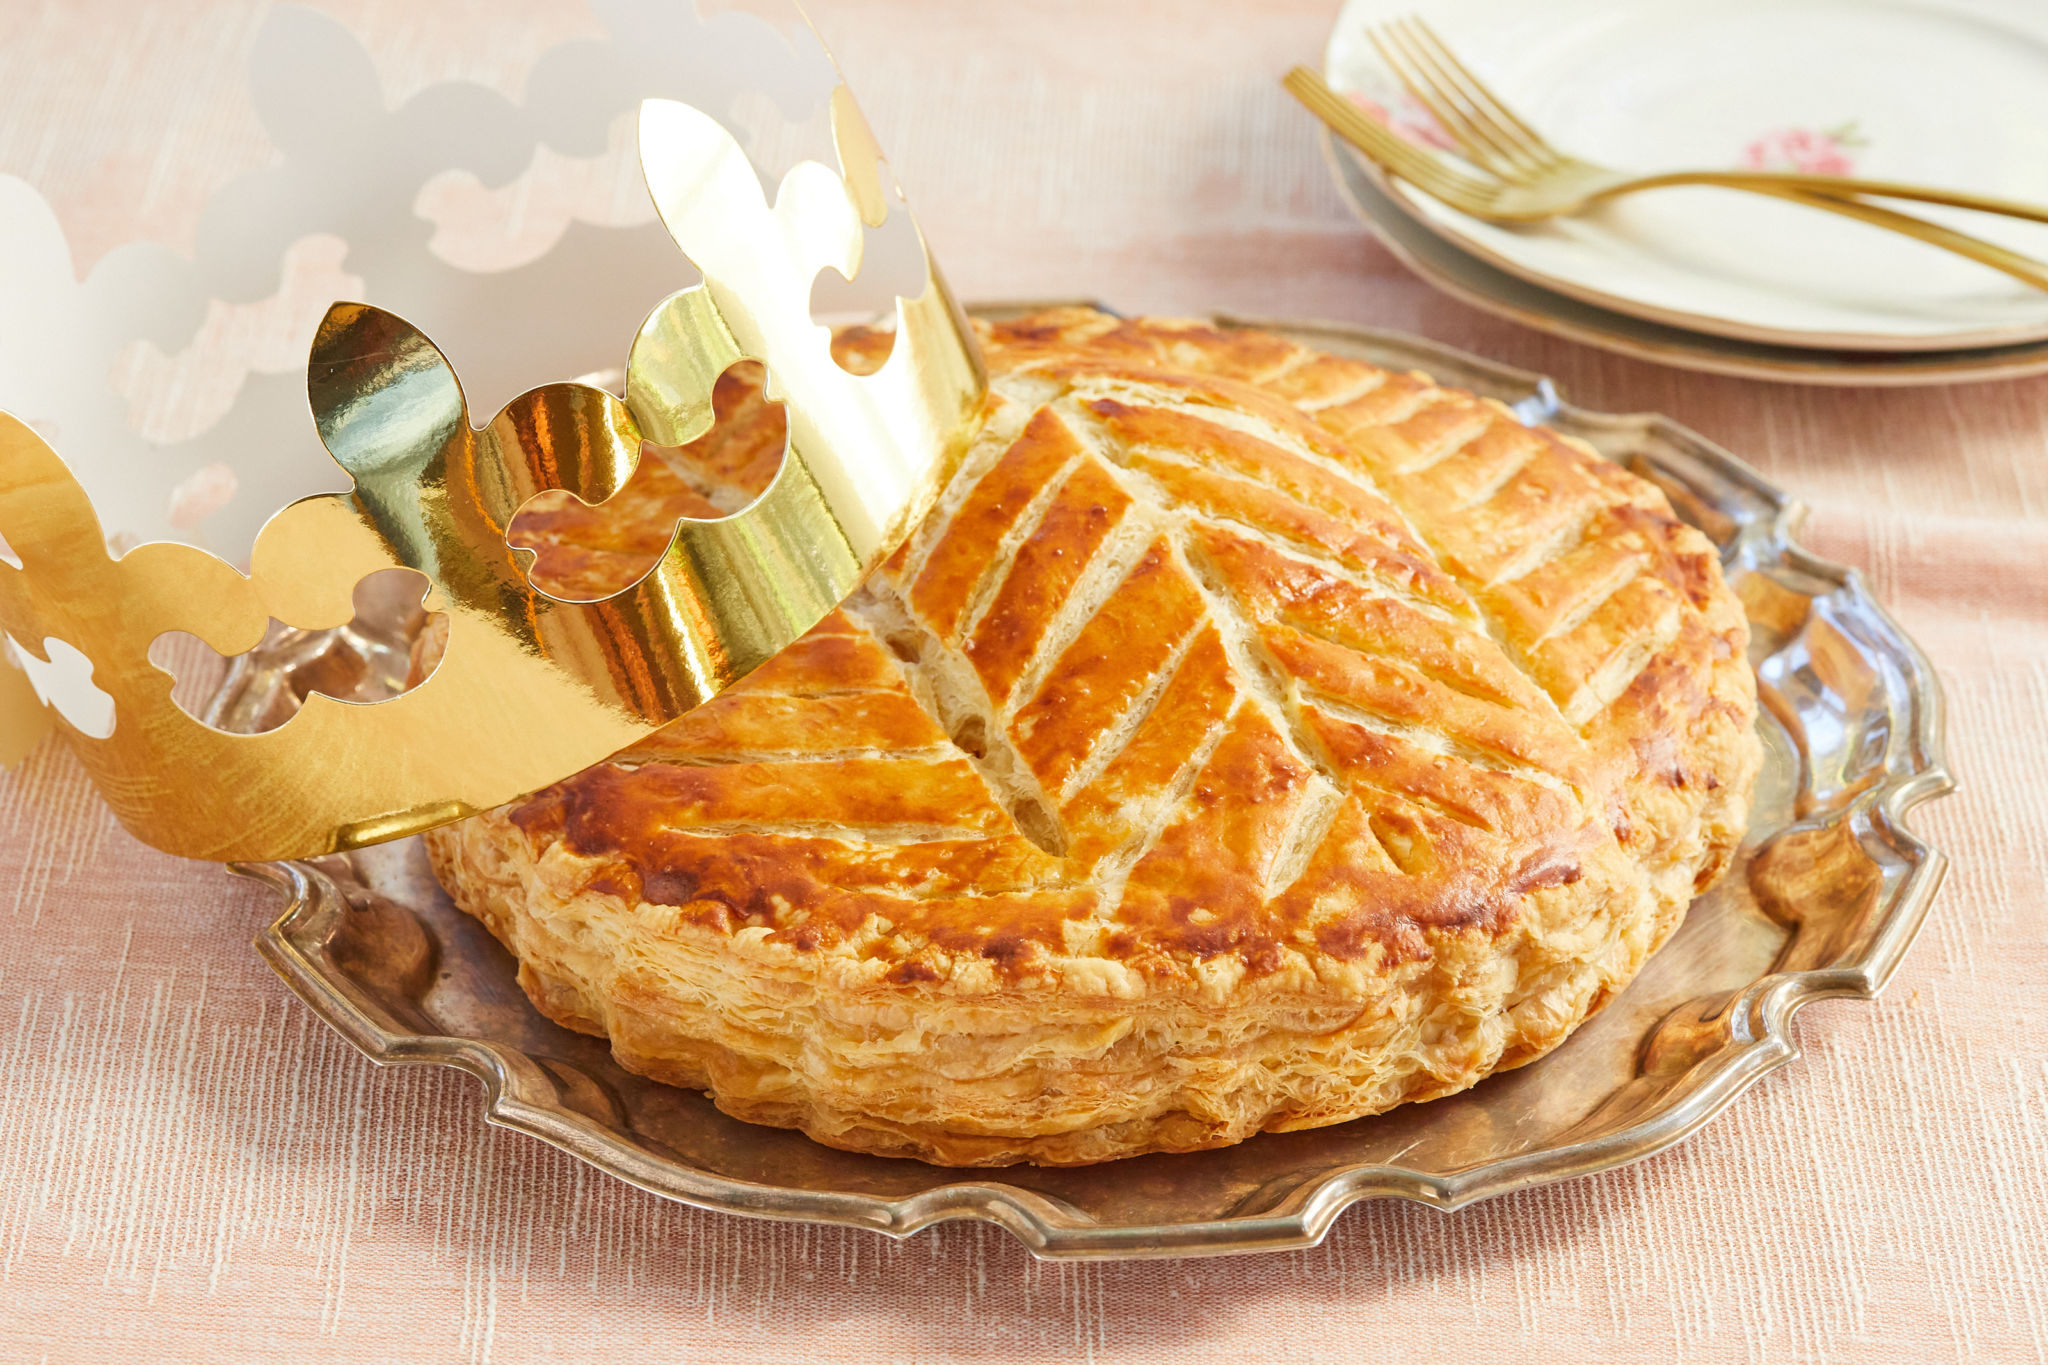 My Galette des Rois with a crown on top.